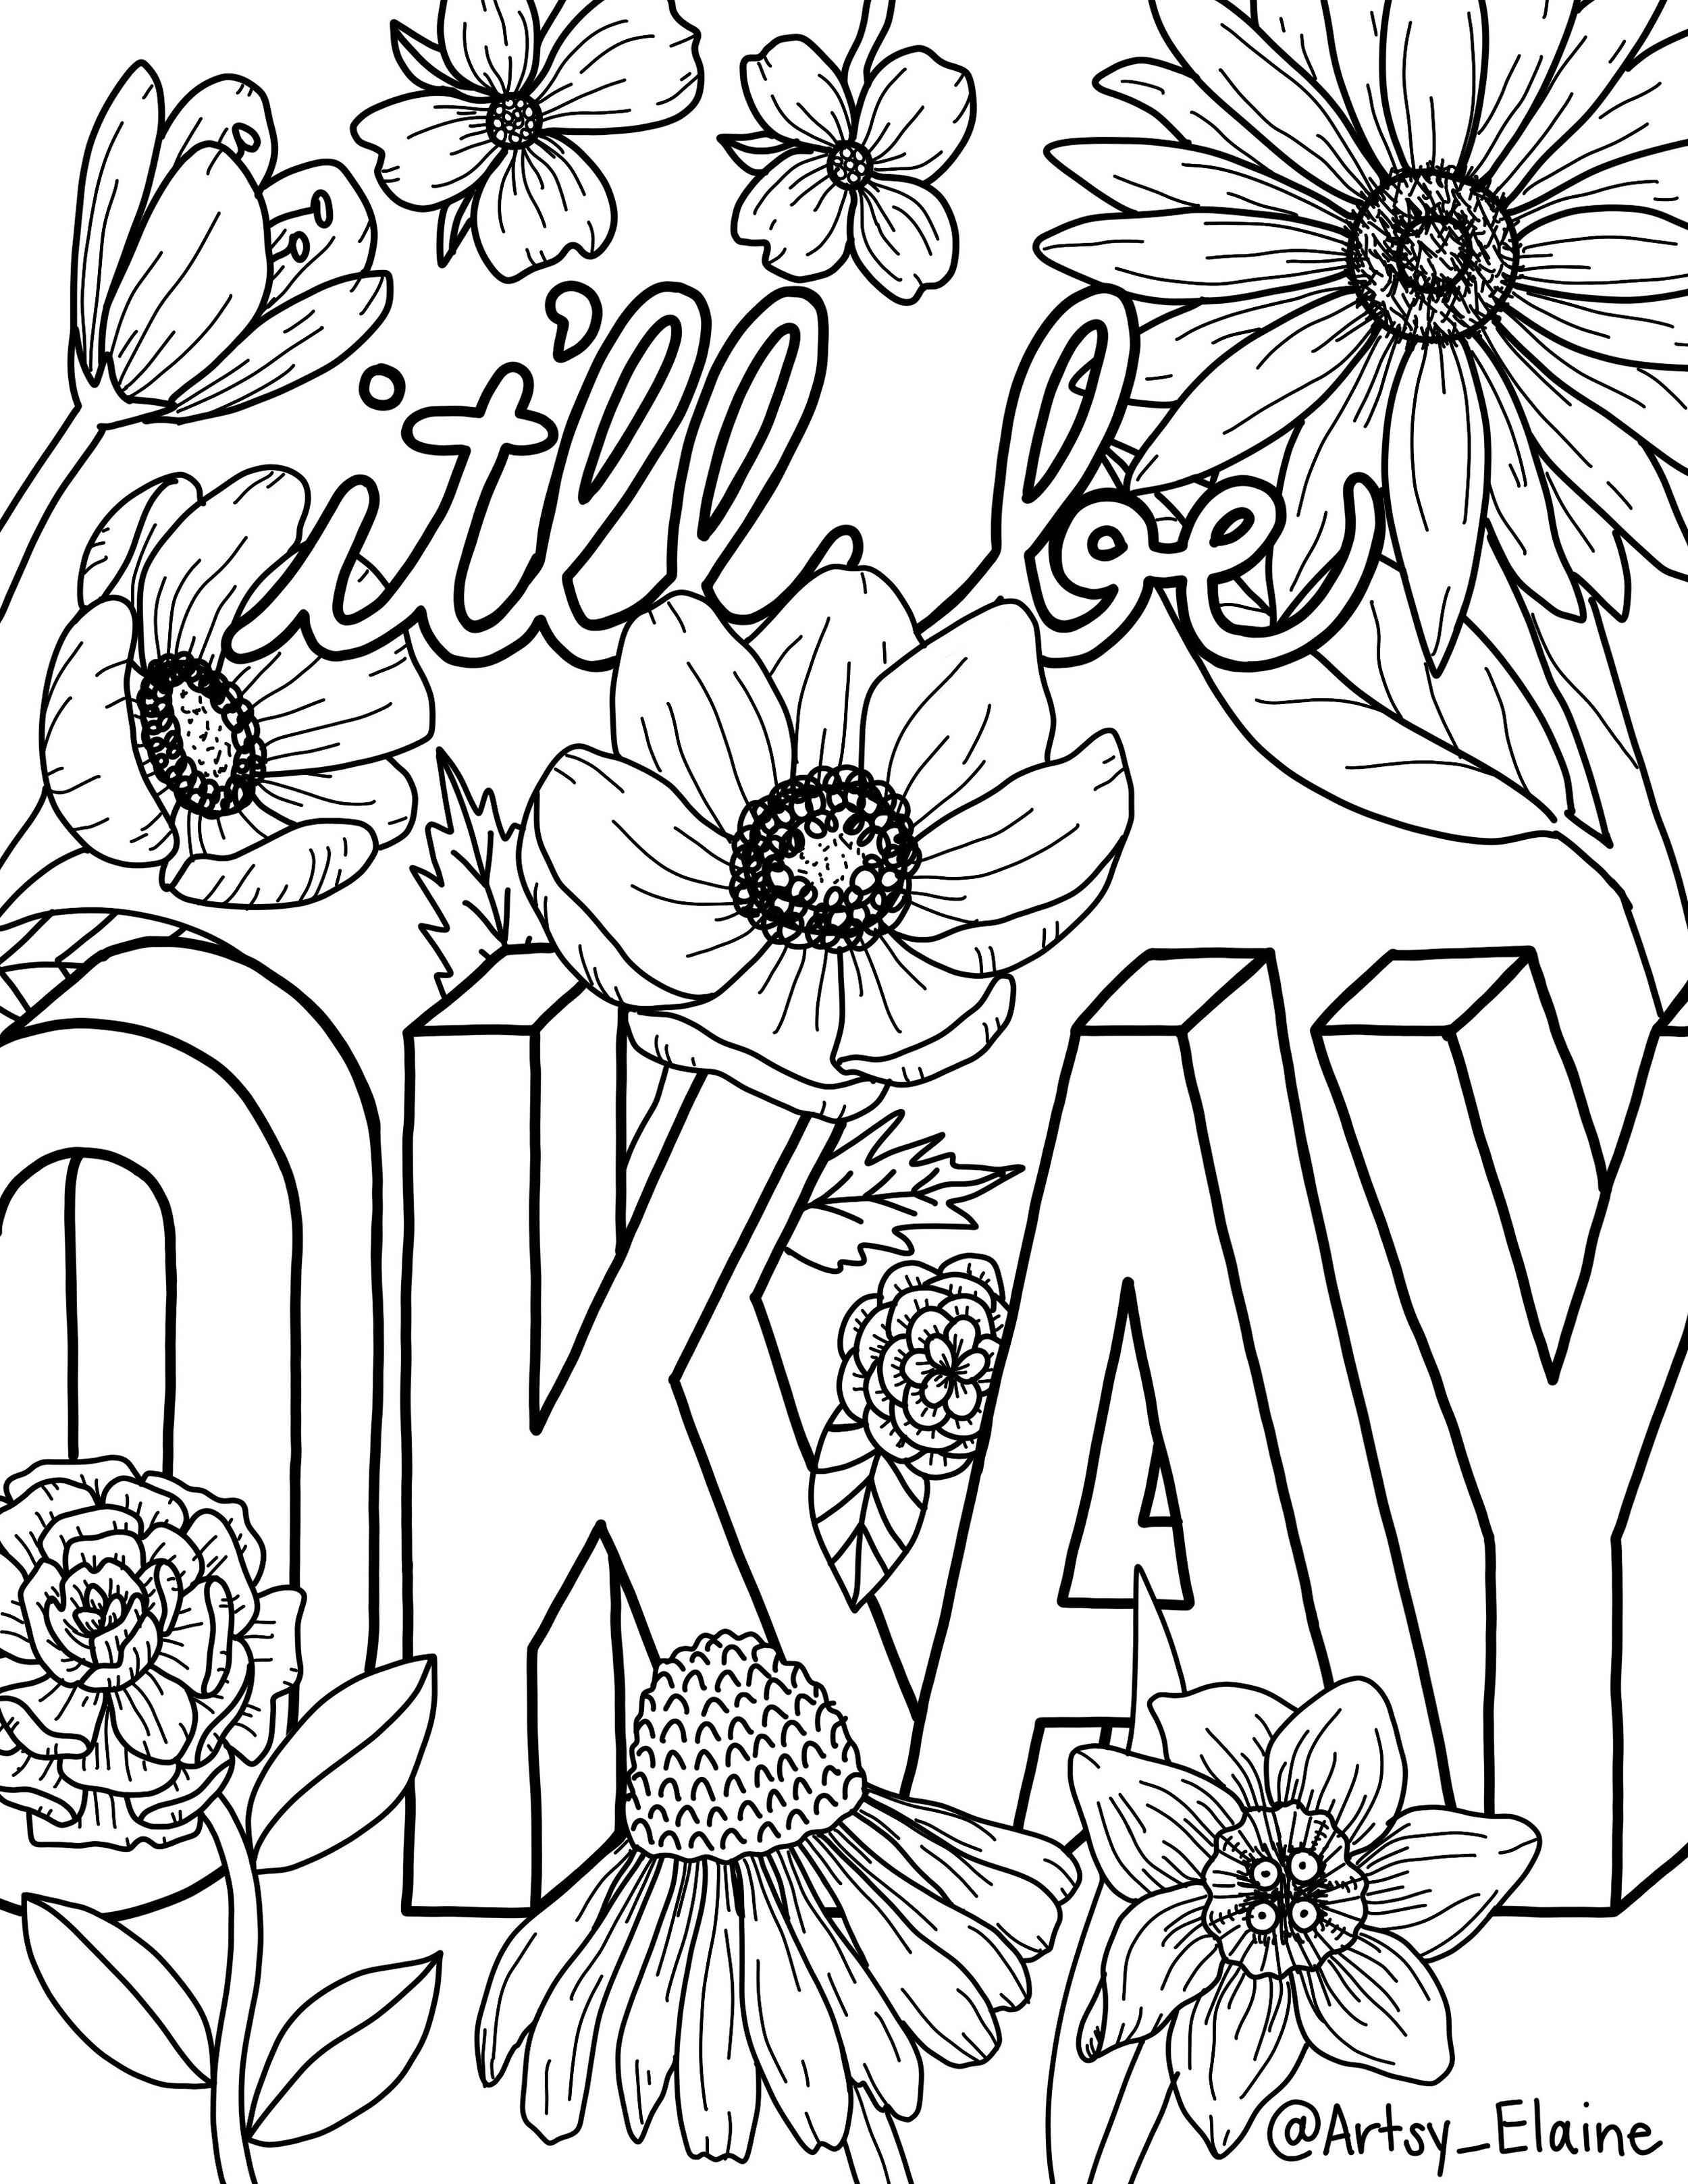 43-best-ideas-for-coloring-artsy-coloring-pages